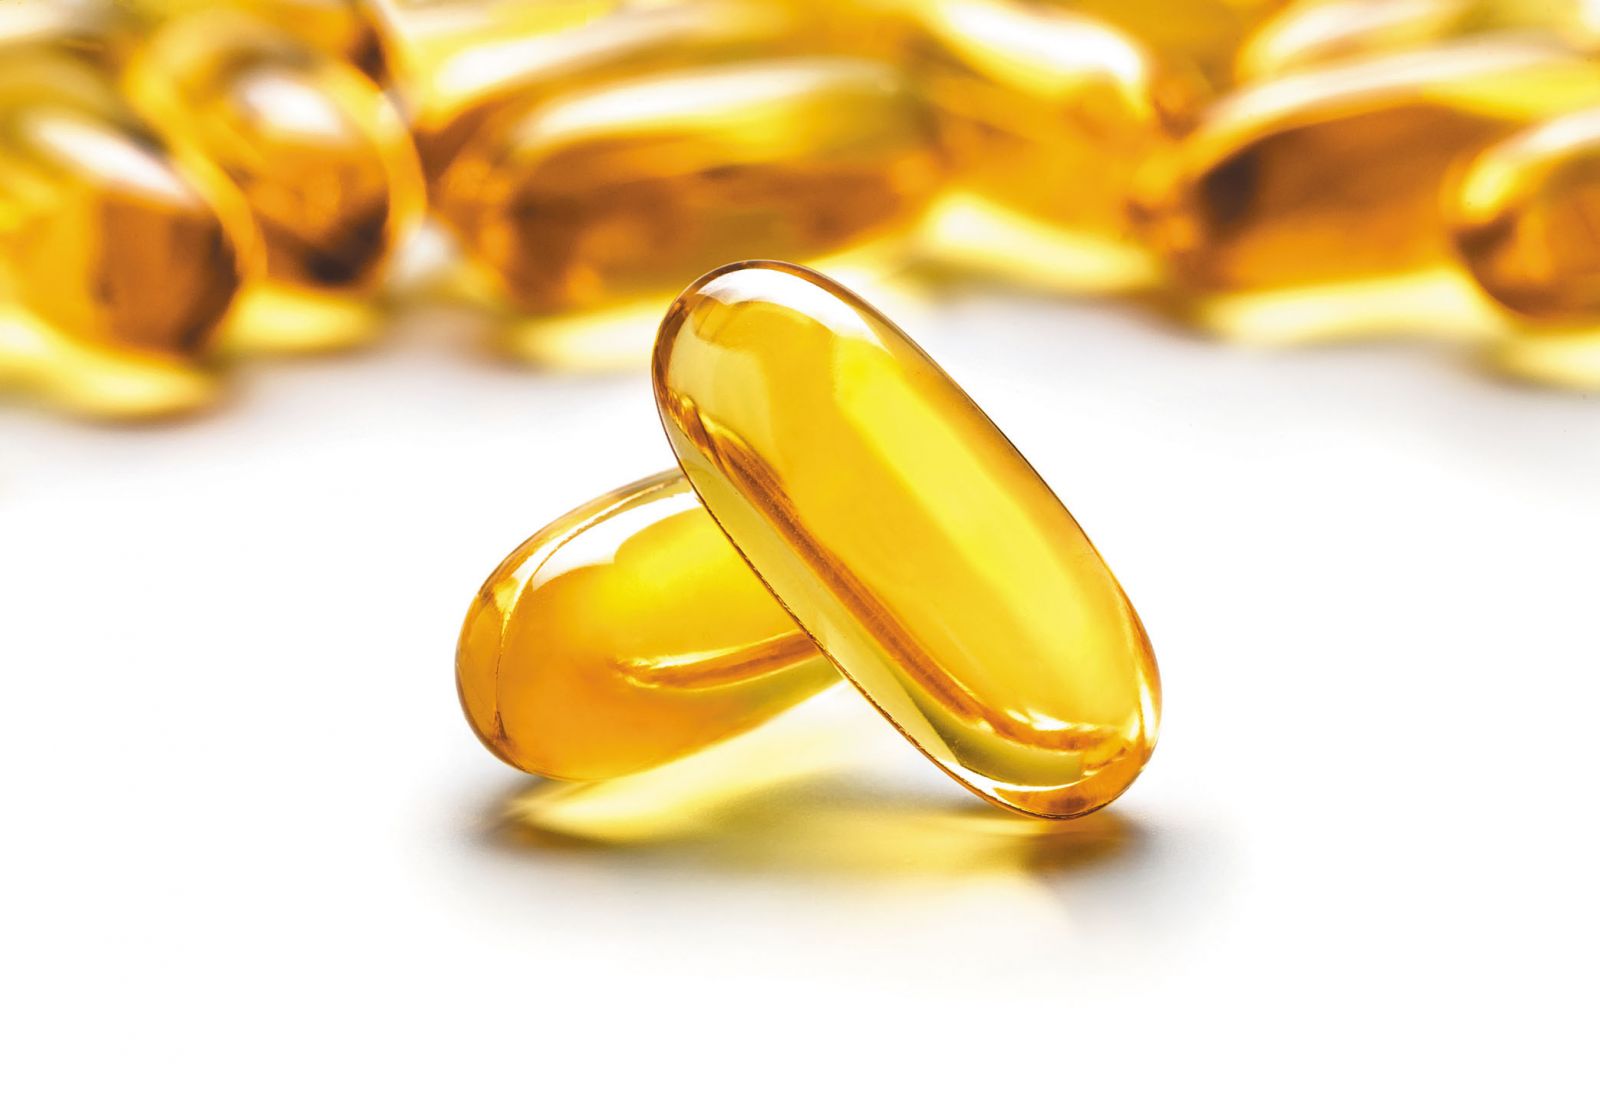 4 New Age Dietary Supplements That Actually Work